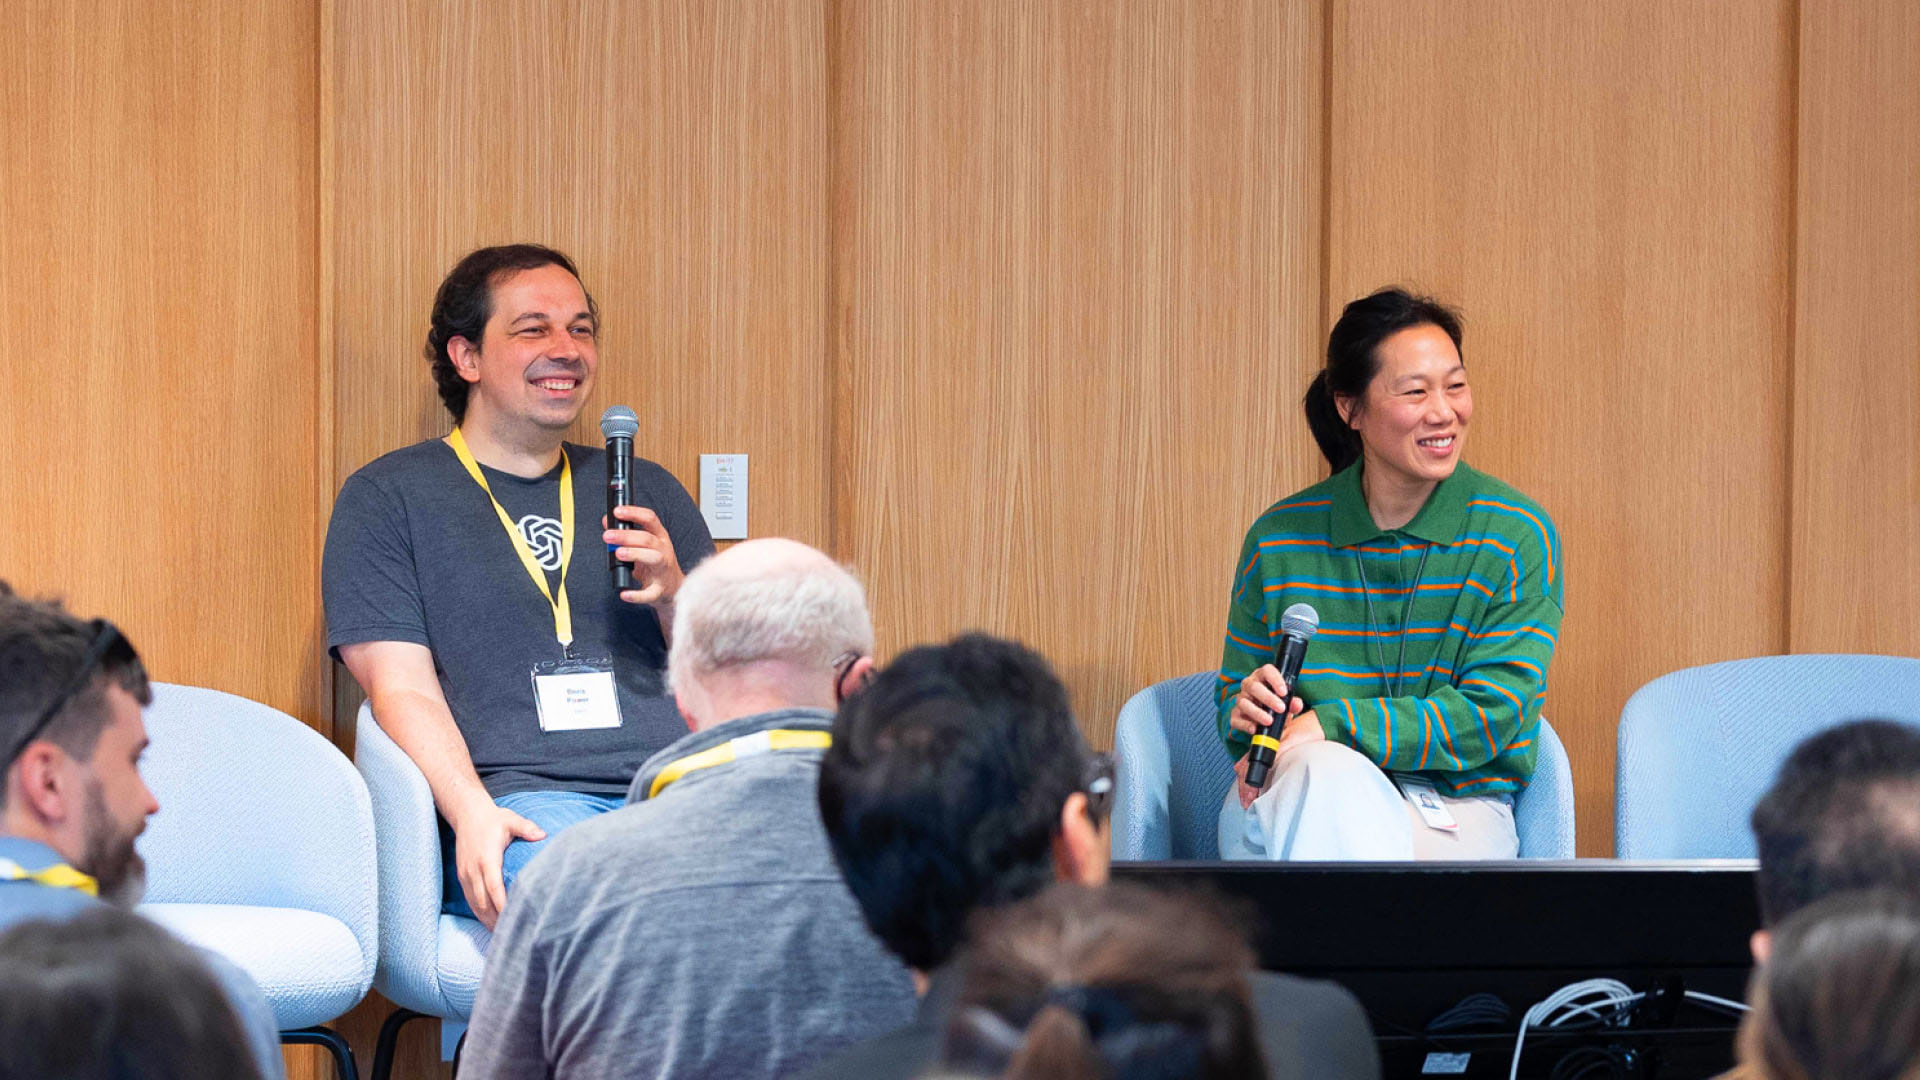 Two people are seated on a panel, both holding microphones and smiling; the man on the left, Boris Power, is wearing a T-shirt with a logo and a lanyard, while the woman on the right, Priscilla Chan, is wearing a green striped shirt. An audience is visible in the foreground.